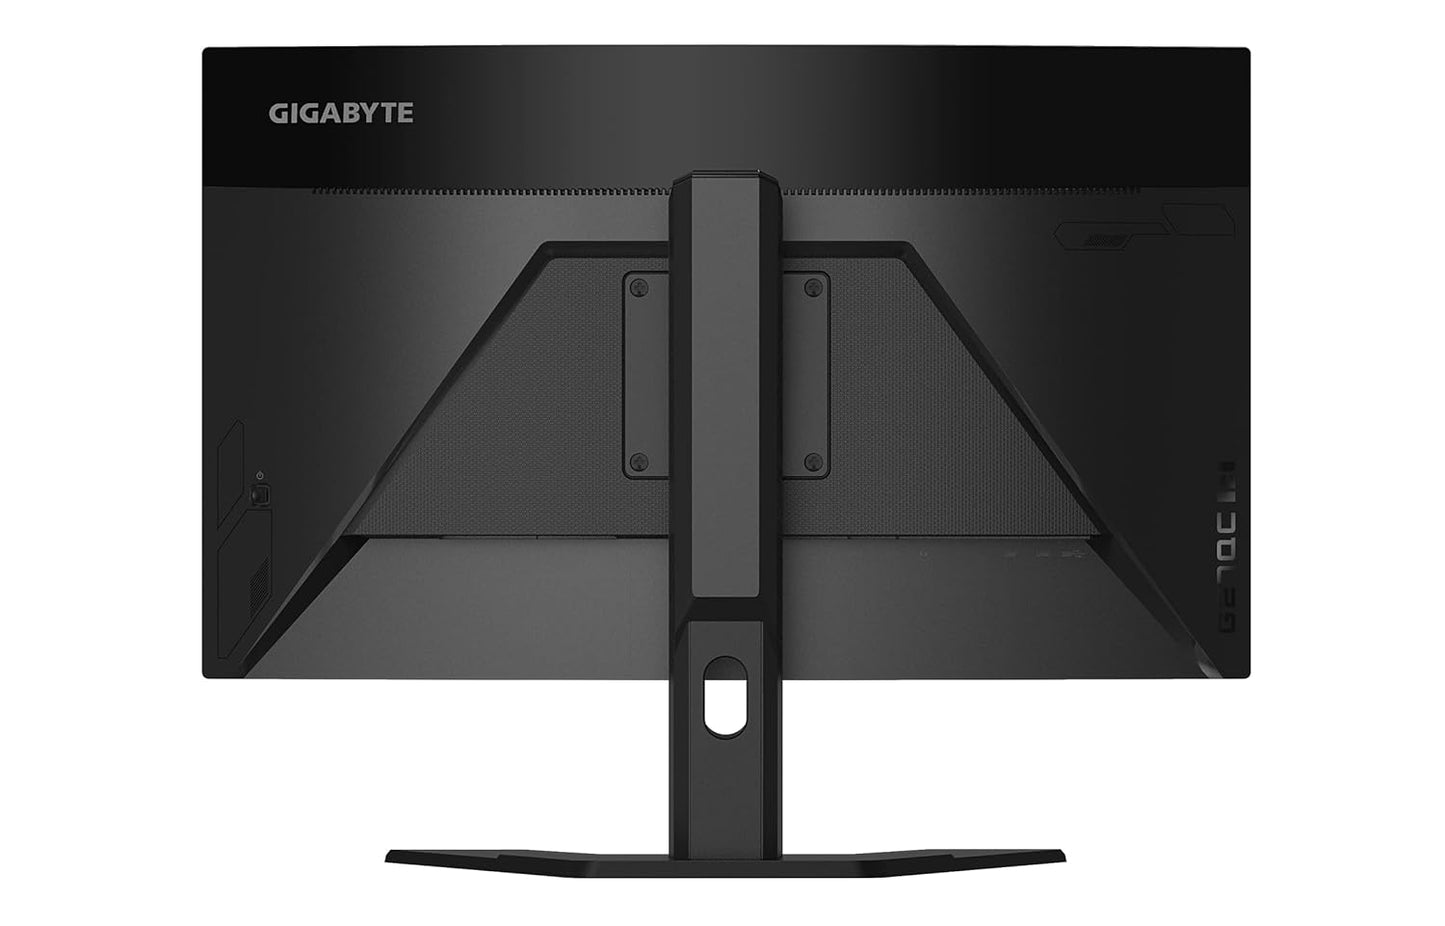 GIGABYTE G27QC A 27 inch 165Hz 1440P VA Panel Curved Gaming Monitor